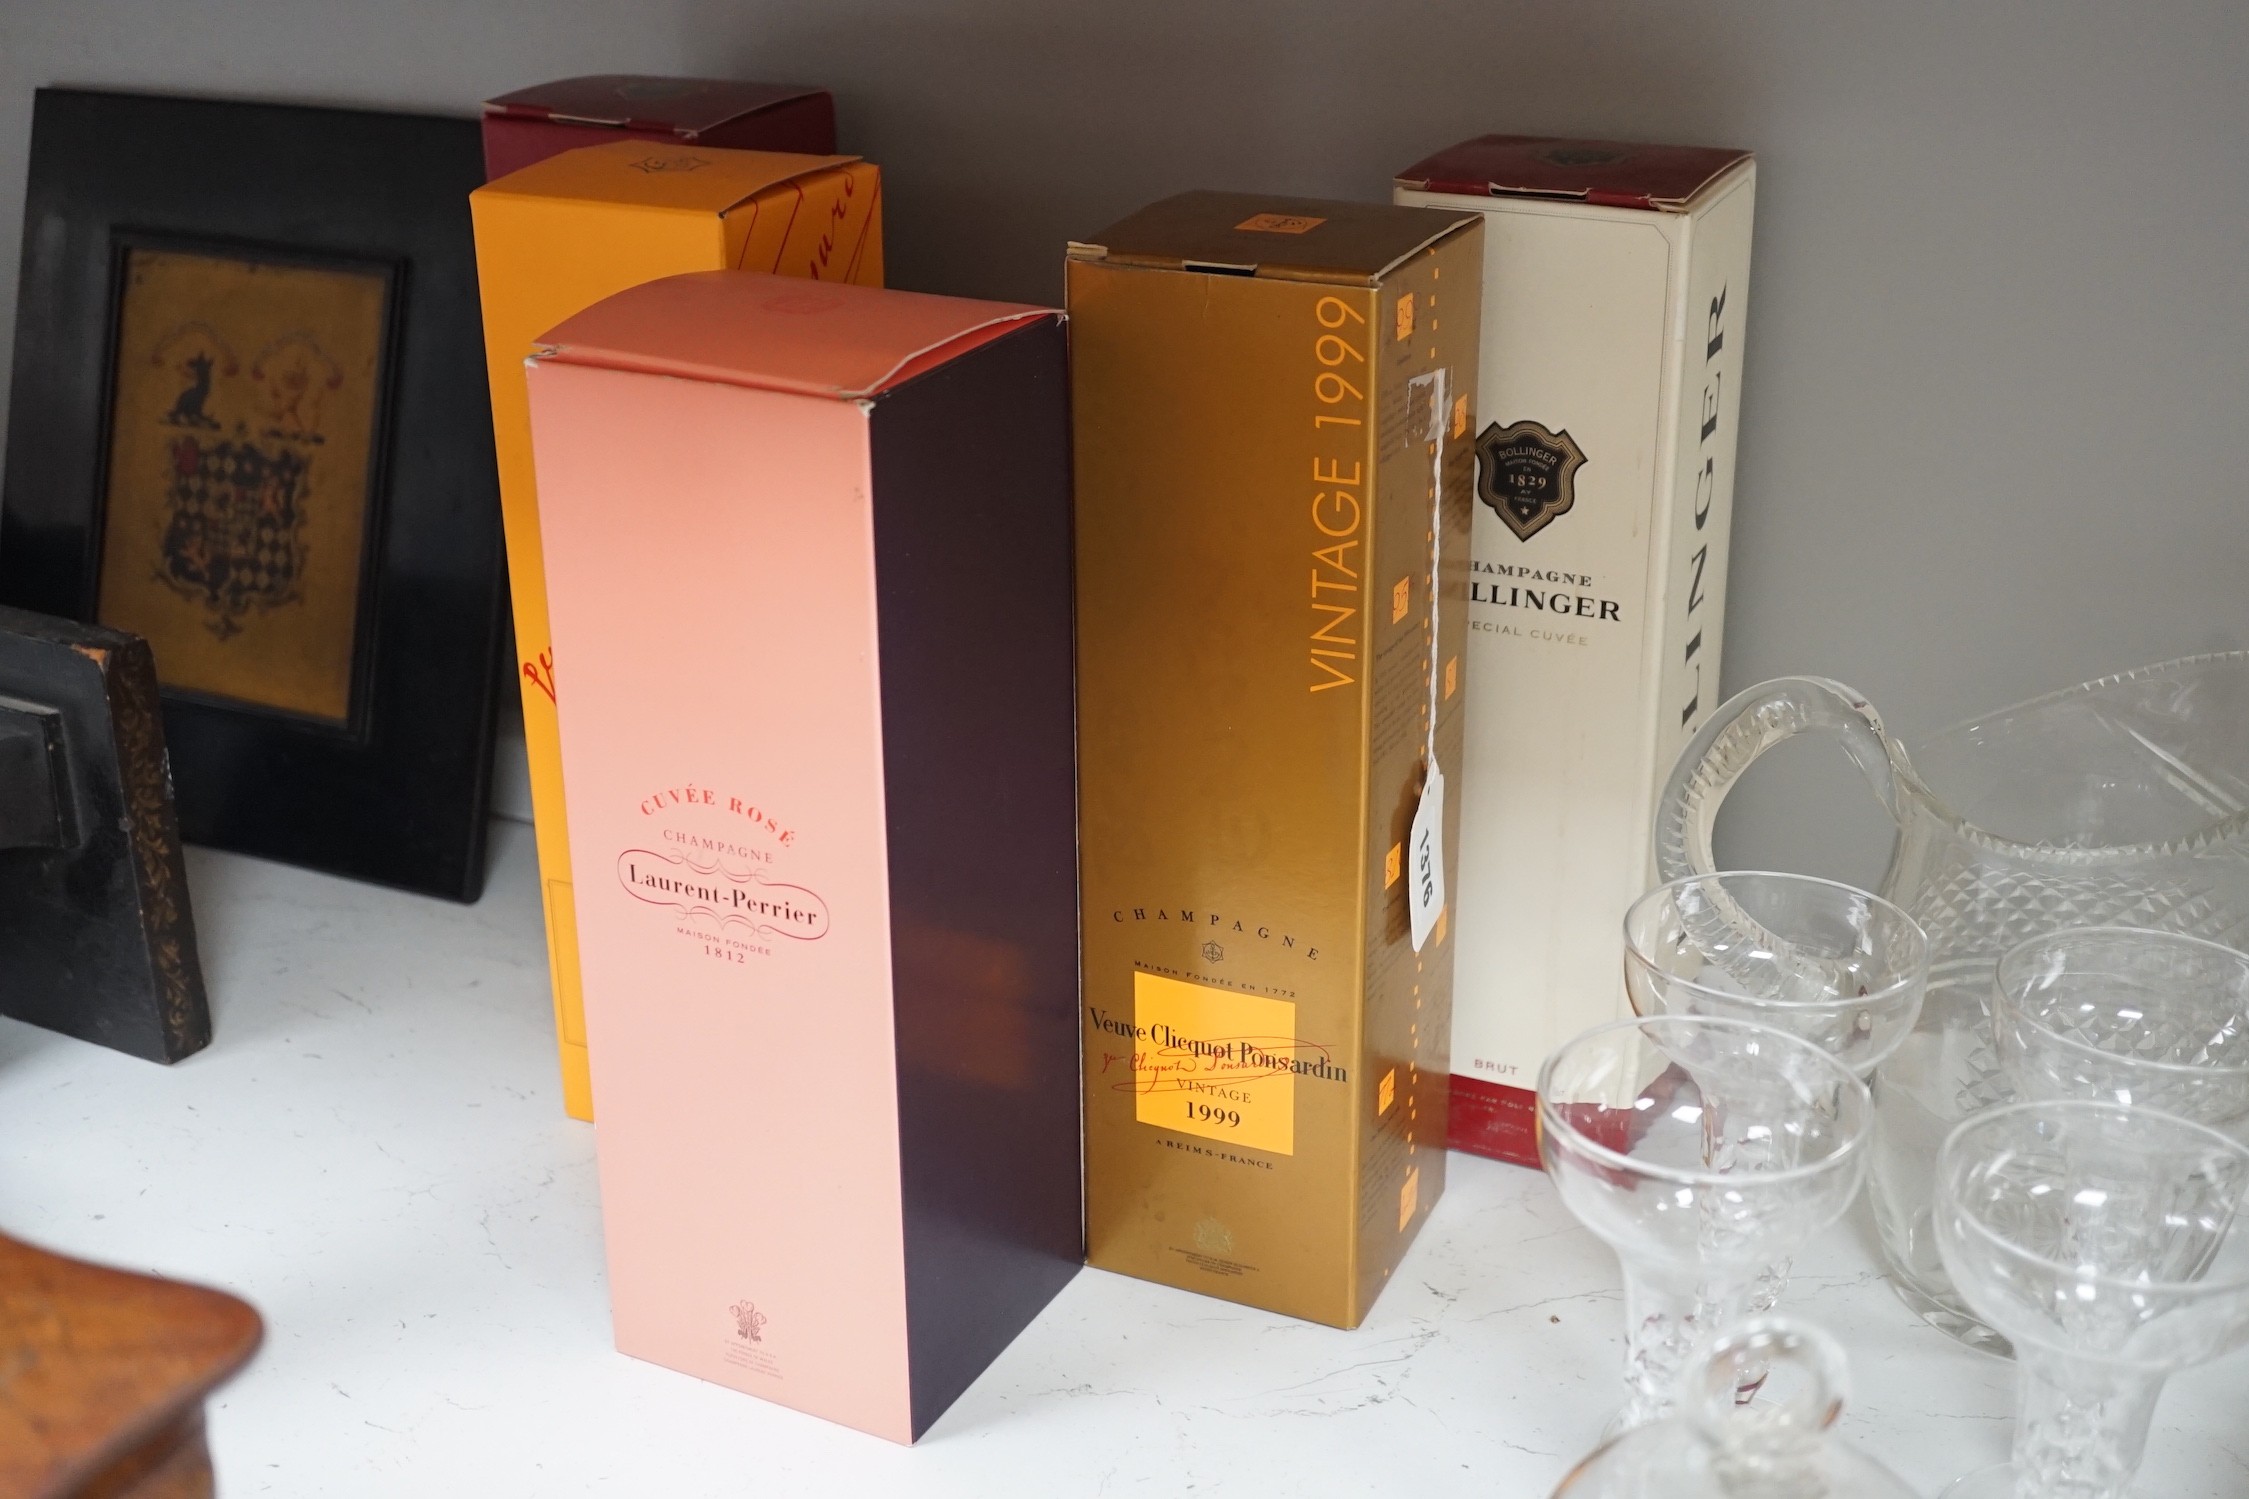 A boxed bottle of Veuve Clicquot 1999 vintage Champagne, a similar boxed NV Champagne, two boxed Bollinge Special Cuvee NV Champagne and a boxed Laurent Perrier NV Champagne.